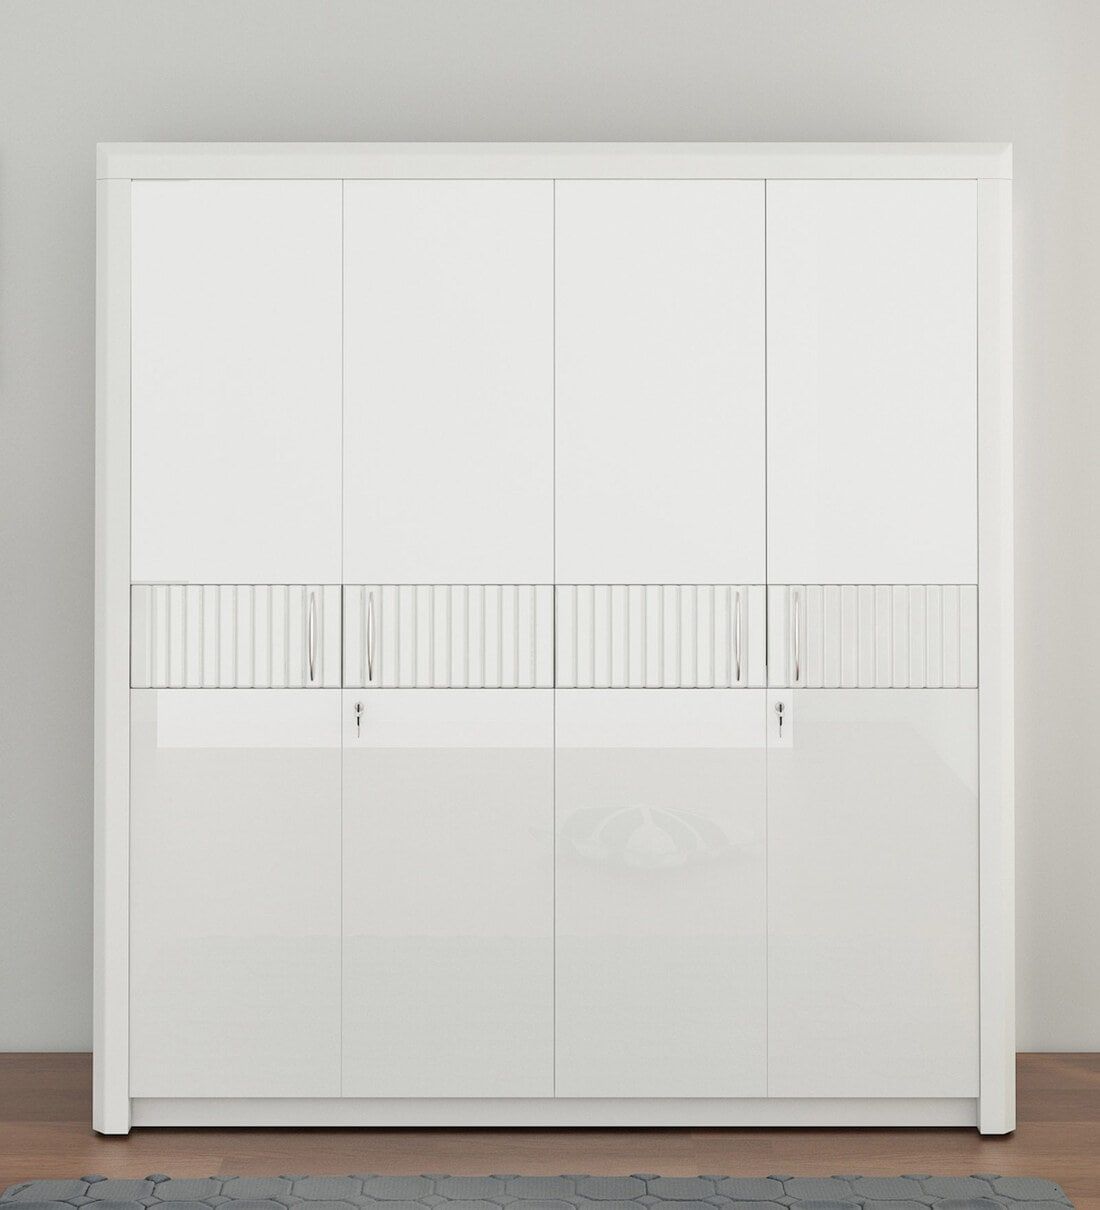 Buy Kosmo Arctic 4 Door Wardrobe In High Gloss White Finish At 31% Off Spacewood | Pepperfry Regarding Arctic White Wardrobes (Photo 10 of 15)